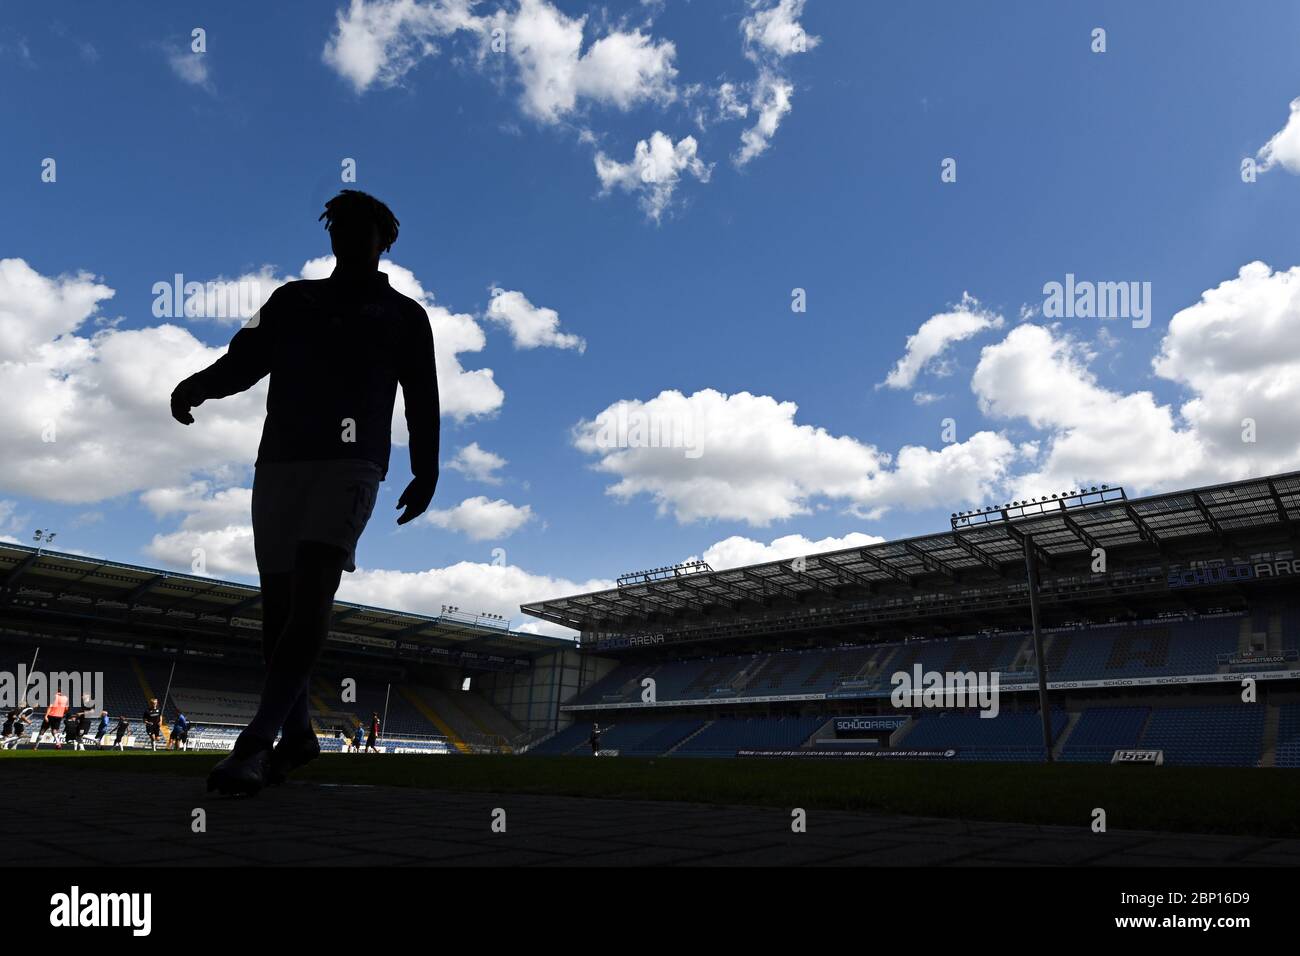 Westphalia, Germany. 17th May, 2020. FILED - 17 May 2020, North Rhine-Westphalia, Bielefeld: Football, 2nd Bundesliga, DSC Arminia Bielefeld - VfL Osnabrück, 26th matchday, Schüco-Arena: Players leave the pitch after warming up for the game. After a 65-day corona break, the ball is rolling again in the Bundesliga. The matches take place without spectators. Photo: Stuart Franklin/Getty/POOL/dpa - IMPORTANT NOTE: In accordance with the regulations of the DFL Deutsche Fußball Liga and the DFB Deutscher Fußball-Bund, it is prohibited to exploit or have exploited in the stadium and/or from the game Stock Photo